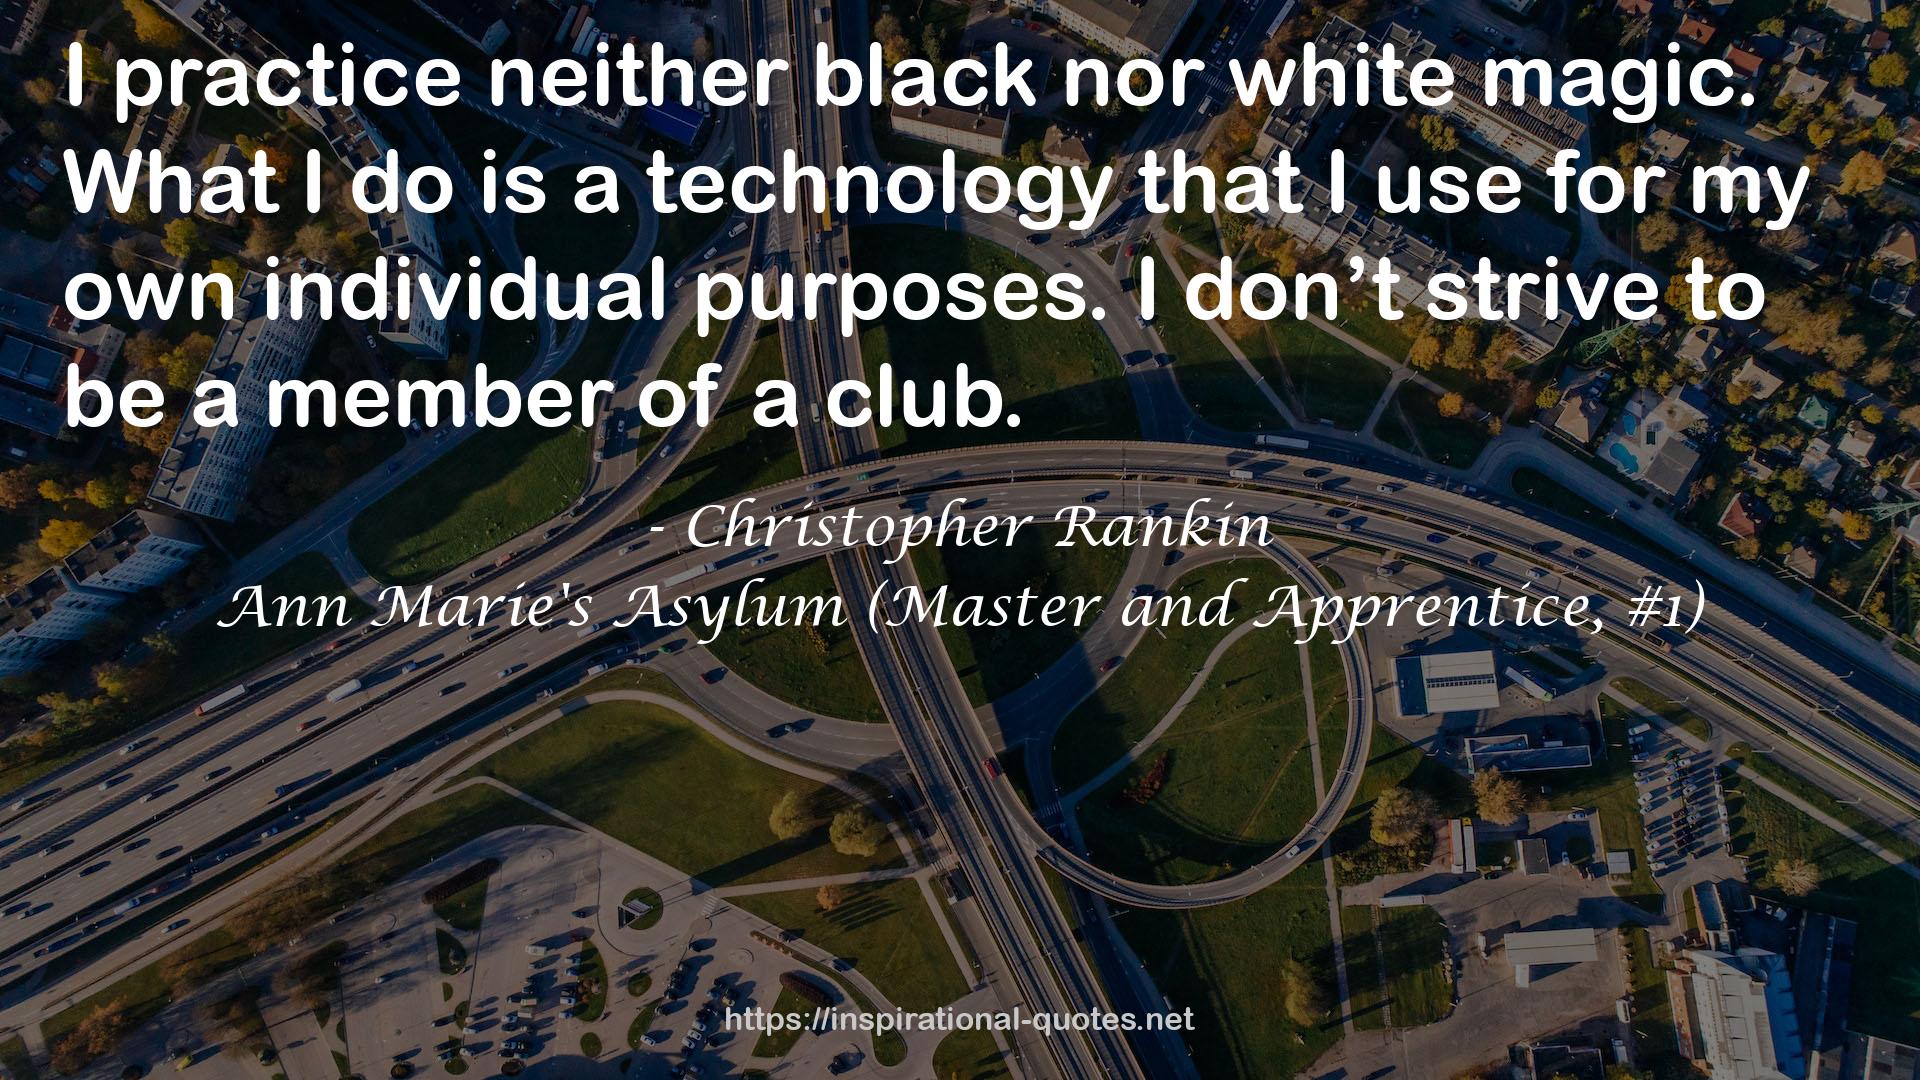 Christopher Rankin QUOTES